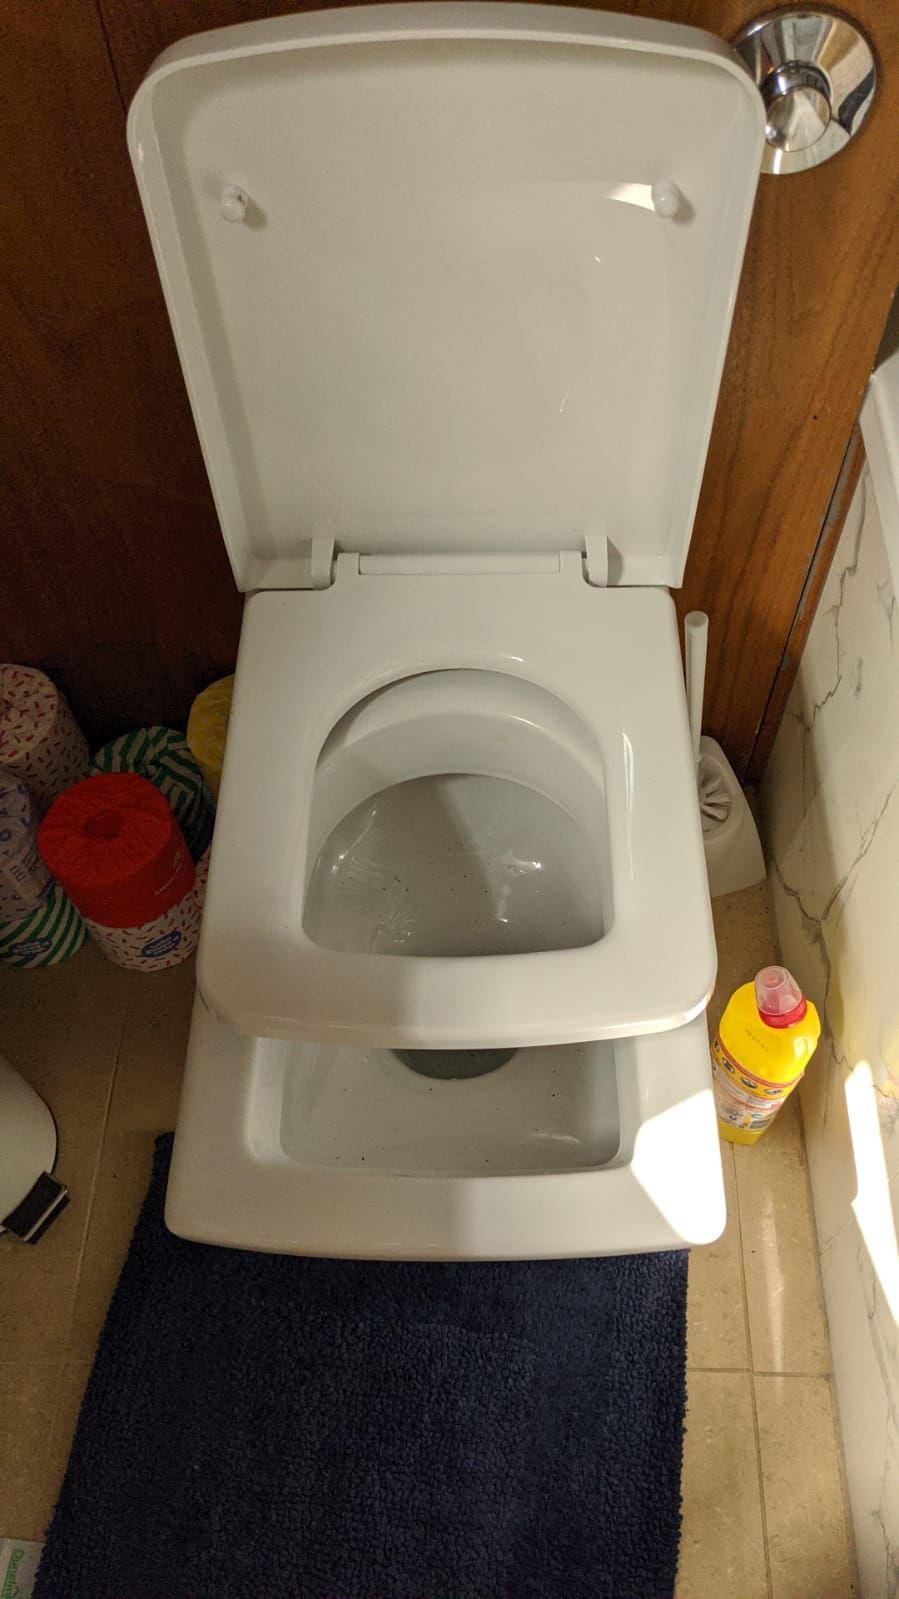 Plumber from water company came to fit toilet seat after they broke the last one... This was the result: